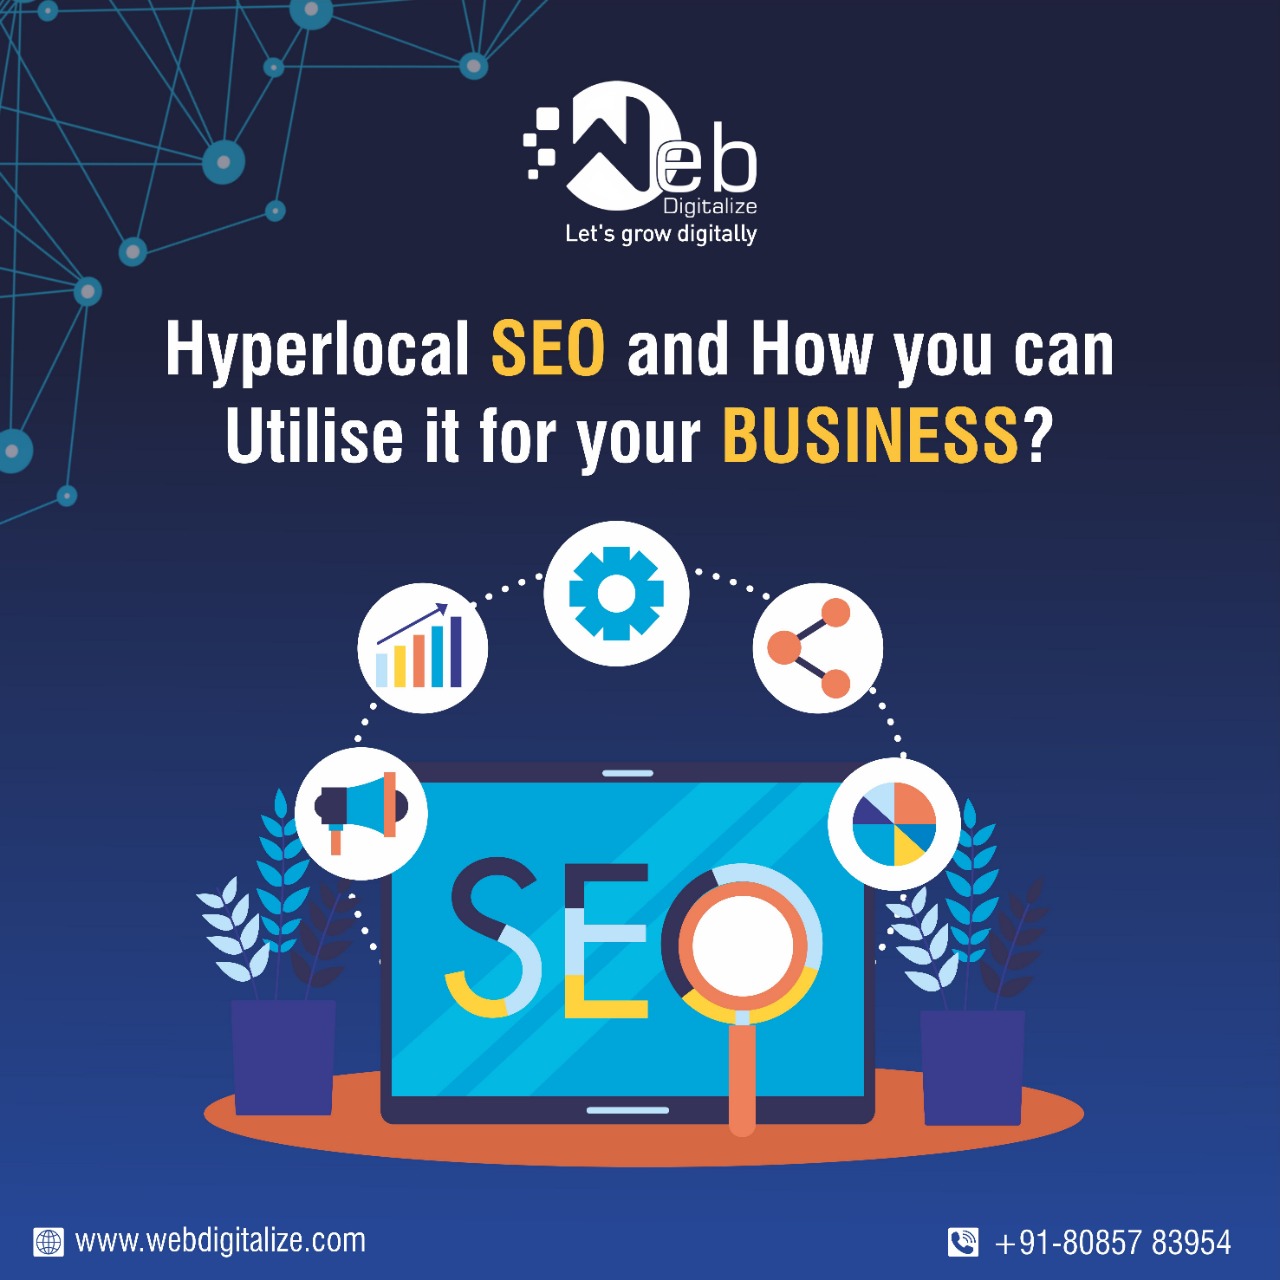 Hyperlocal SEO and how you can utilise it for your business?